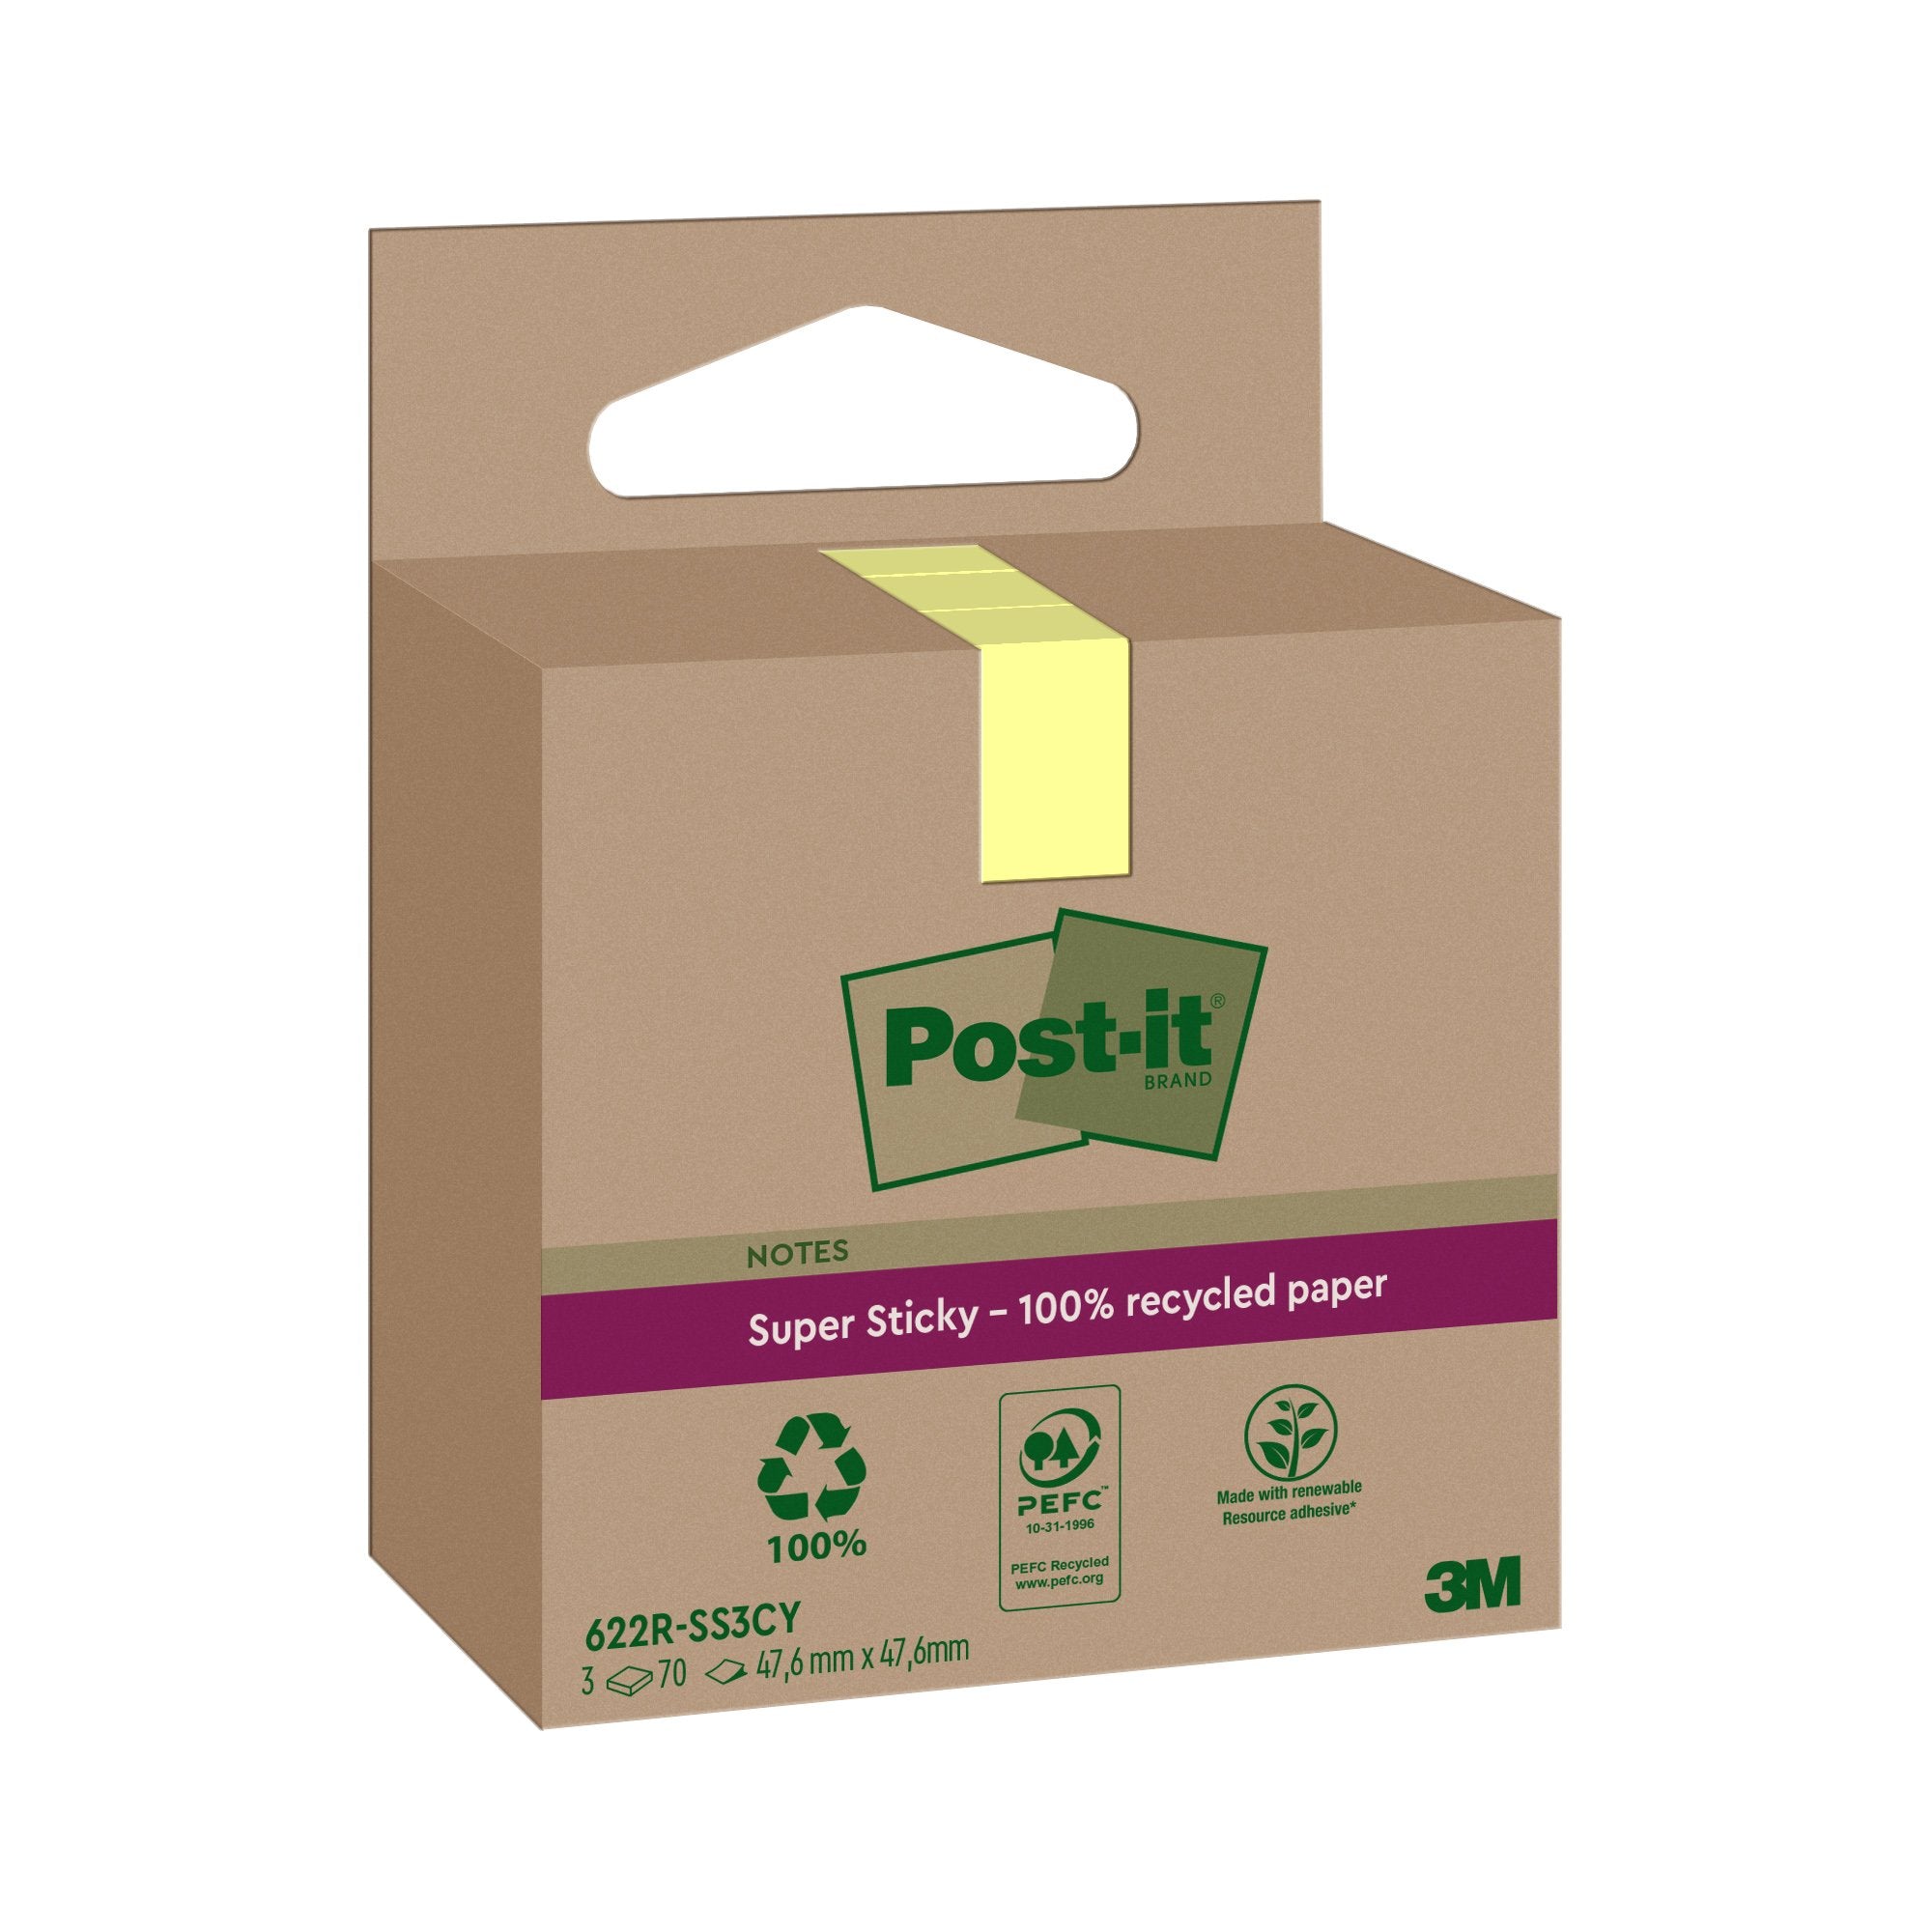 post-it-cf-3pz-blocco-70fg-supersticky-green-47-6x47x6mm-622r-ss3cy-giallo